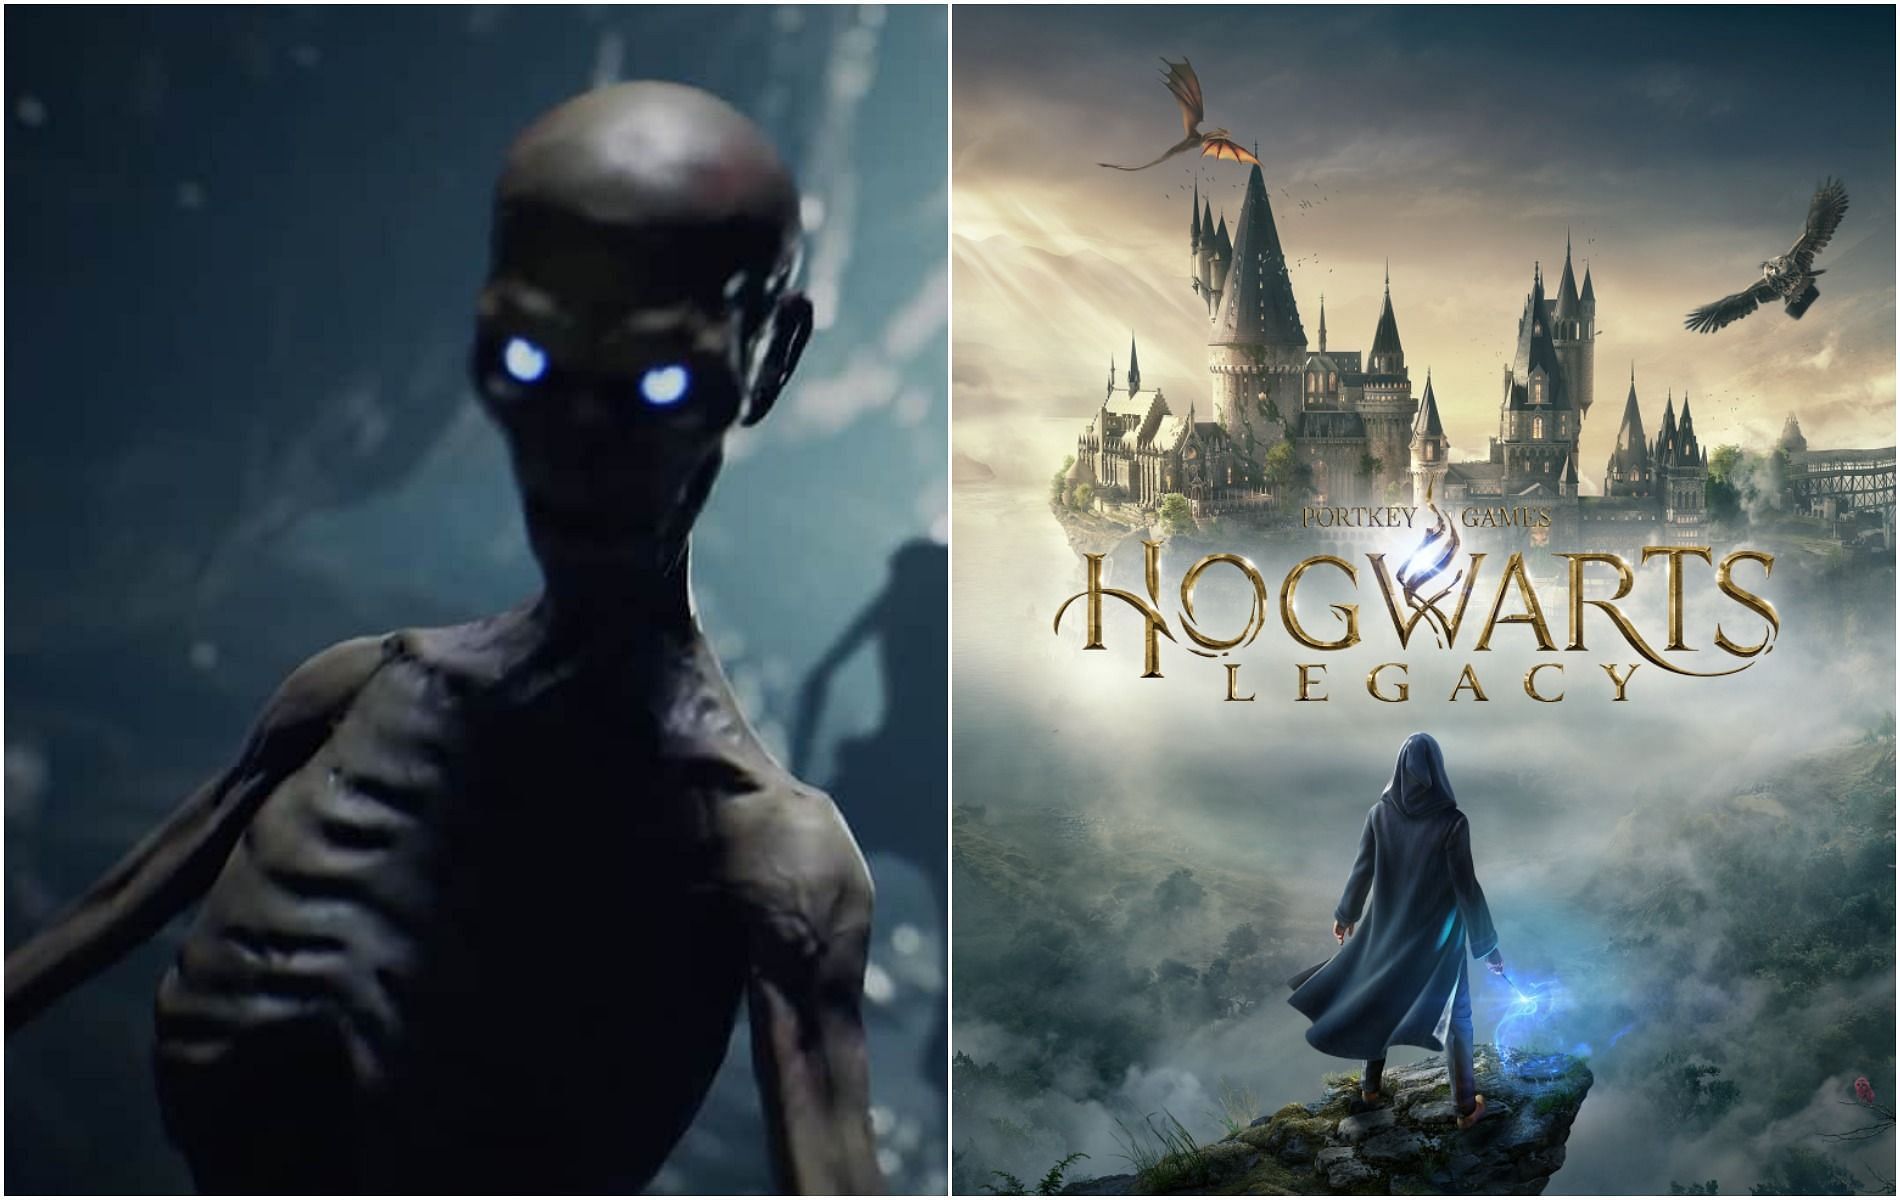 Hogwarts Legacy might get a 17+ rating from ESRB (Images via Portkey Games)